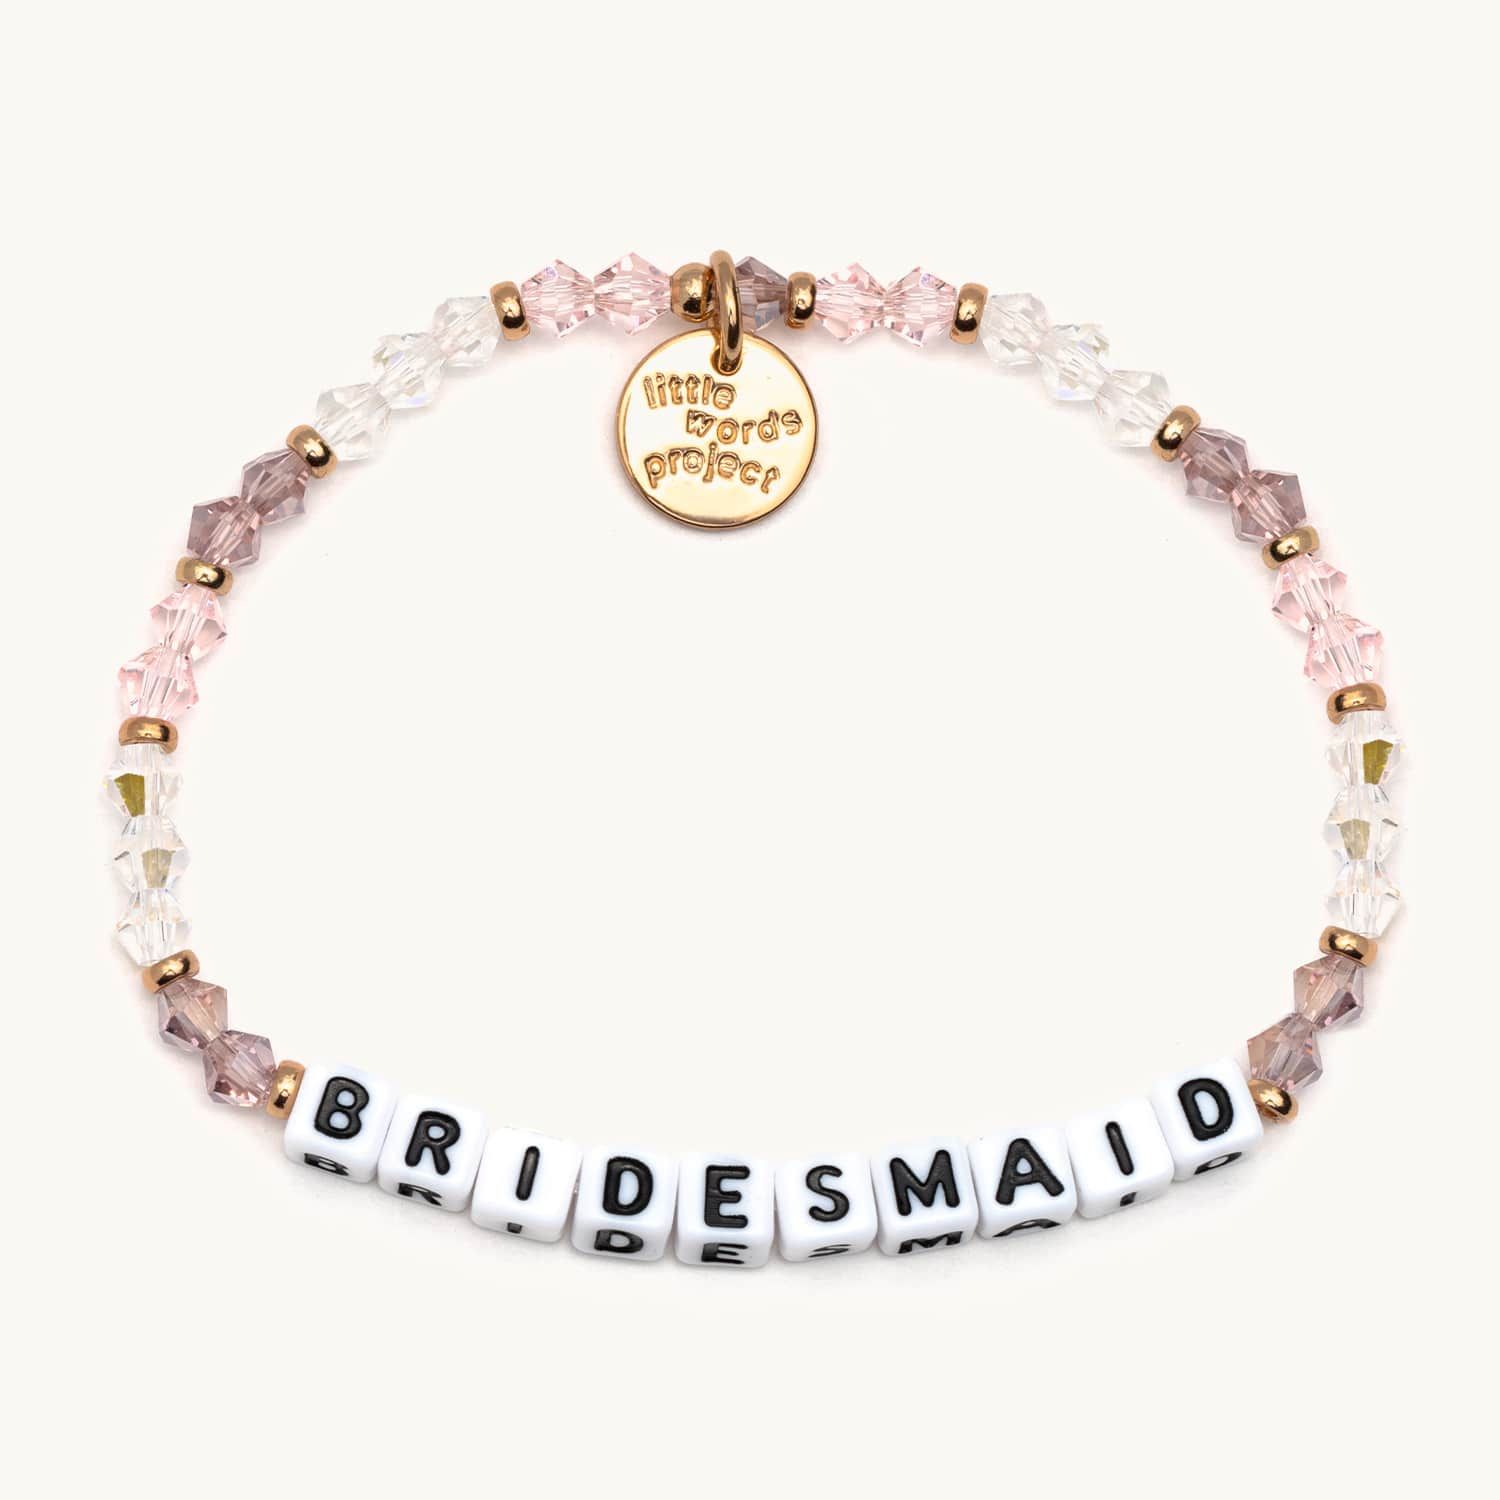 Bridesmaid | Little Words Project